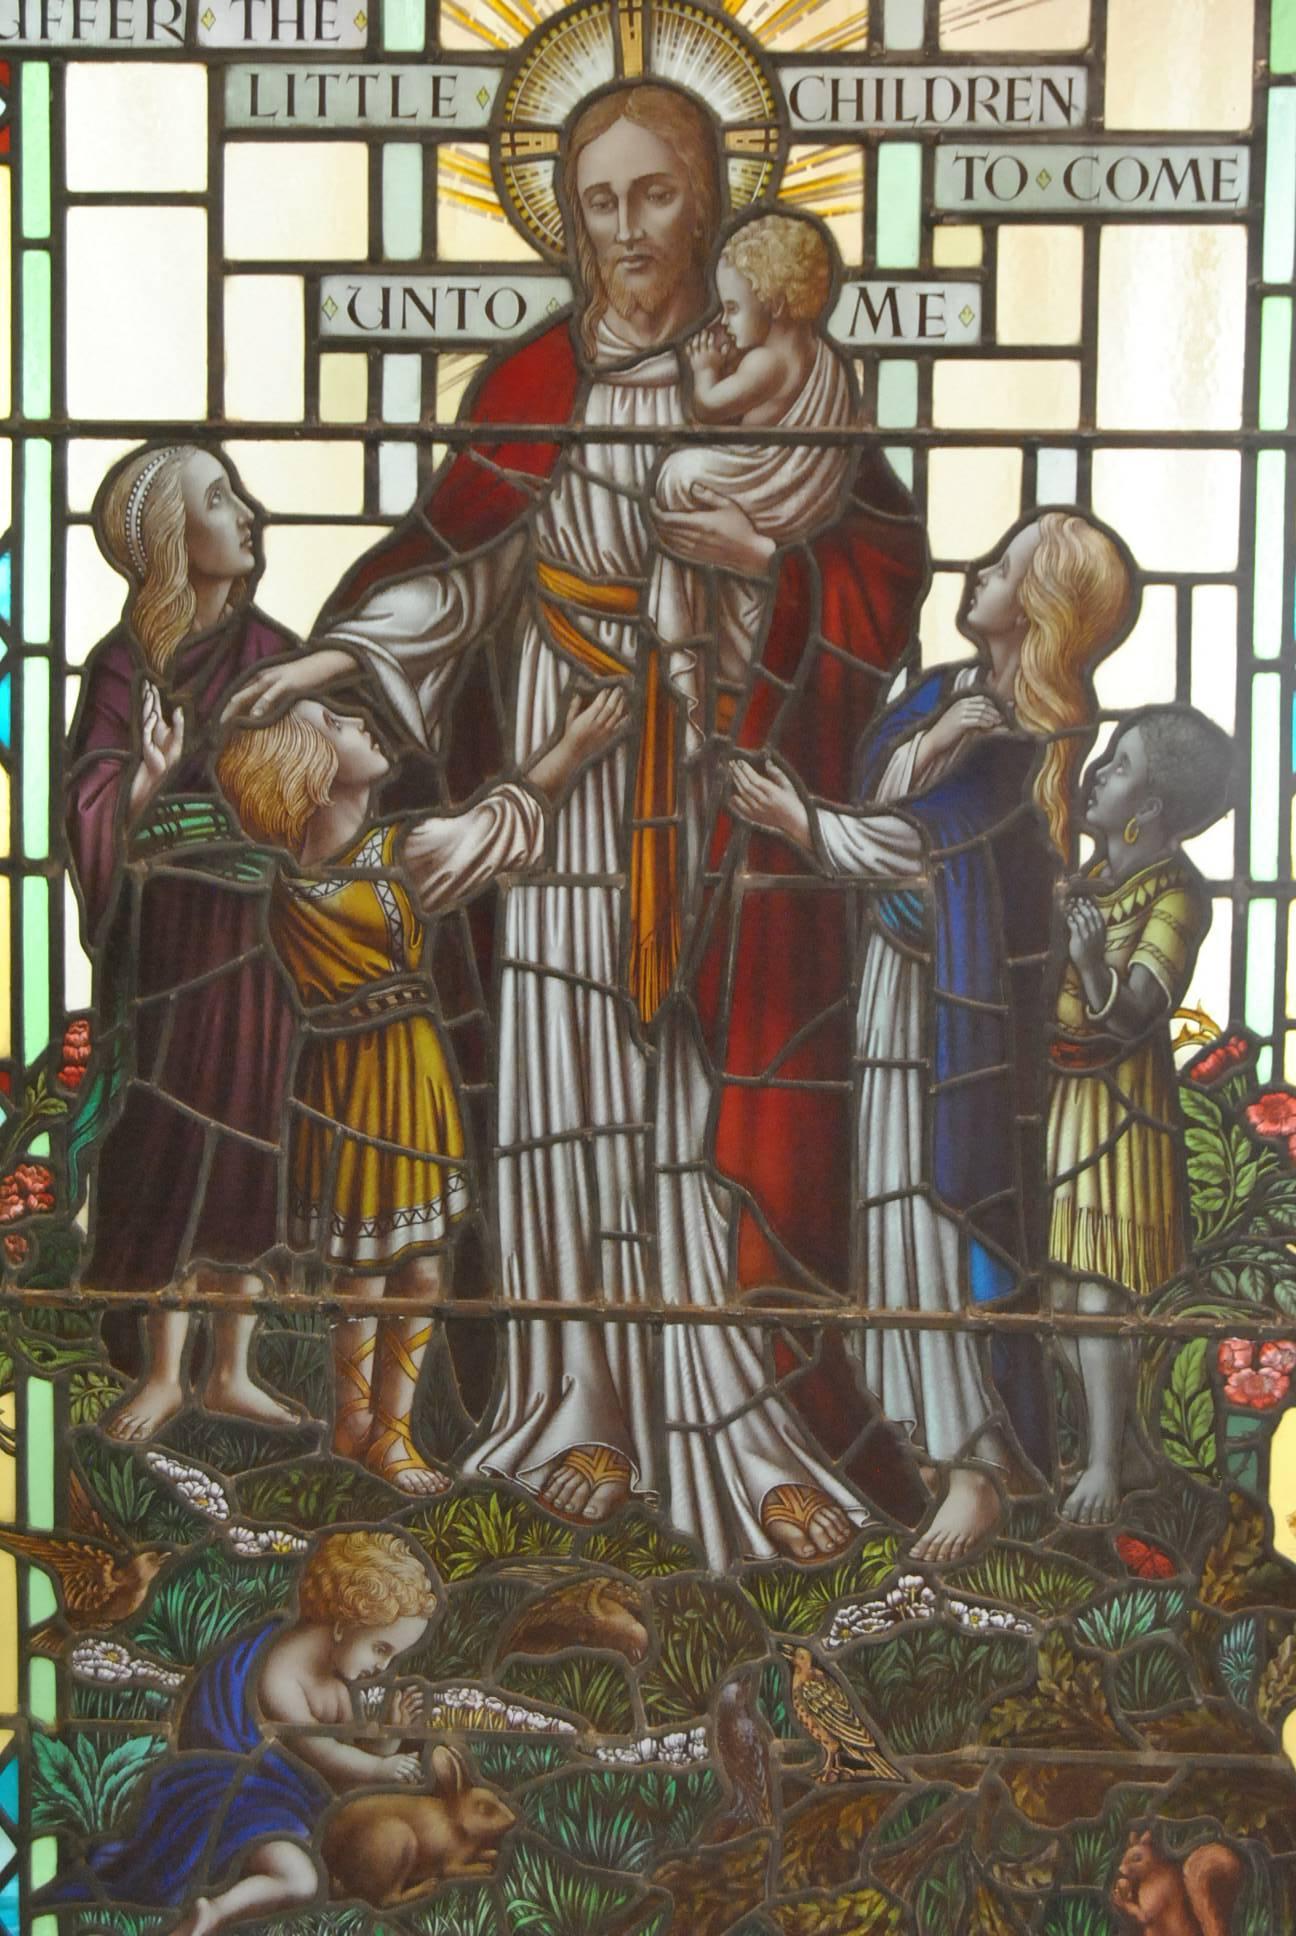 A stunning stained glass window from an American church. It depicts Jesus surrounded by children. It reads, "Suffer, Let the Children Come Unto Me" and the lower right "To the Glory of God" with a dedication. Brilliant colors